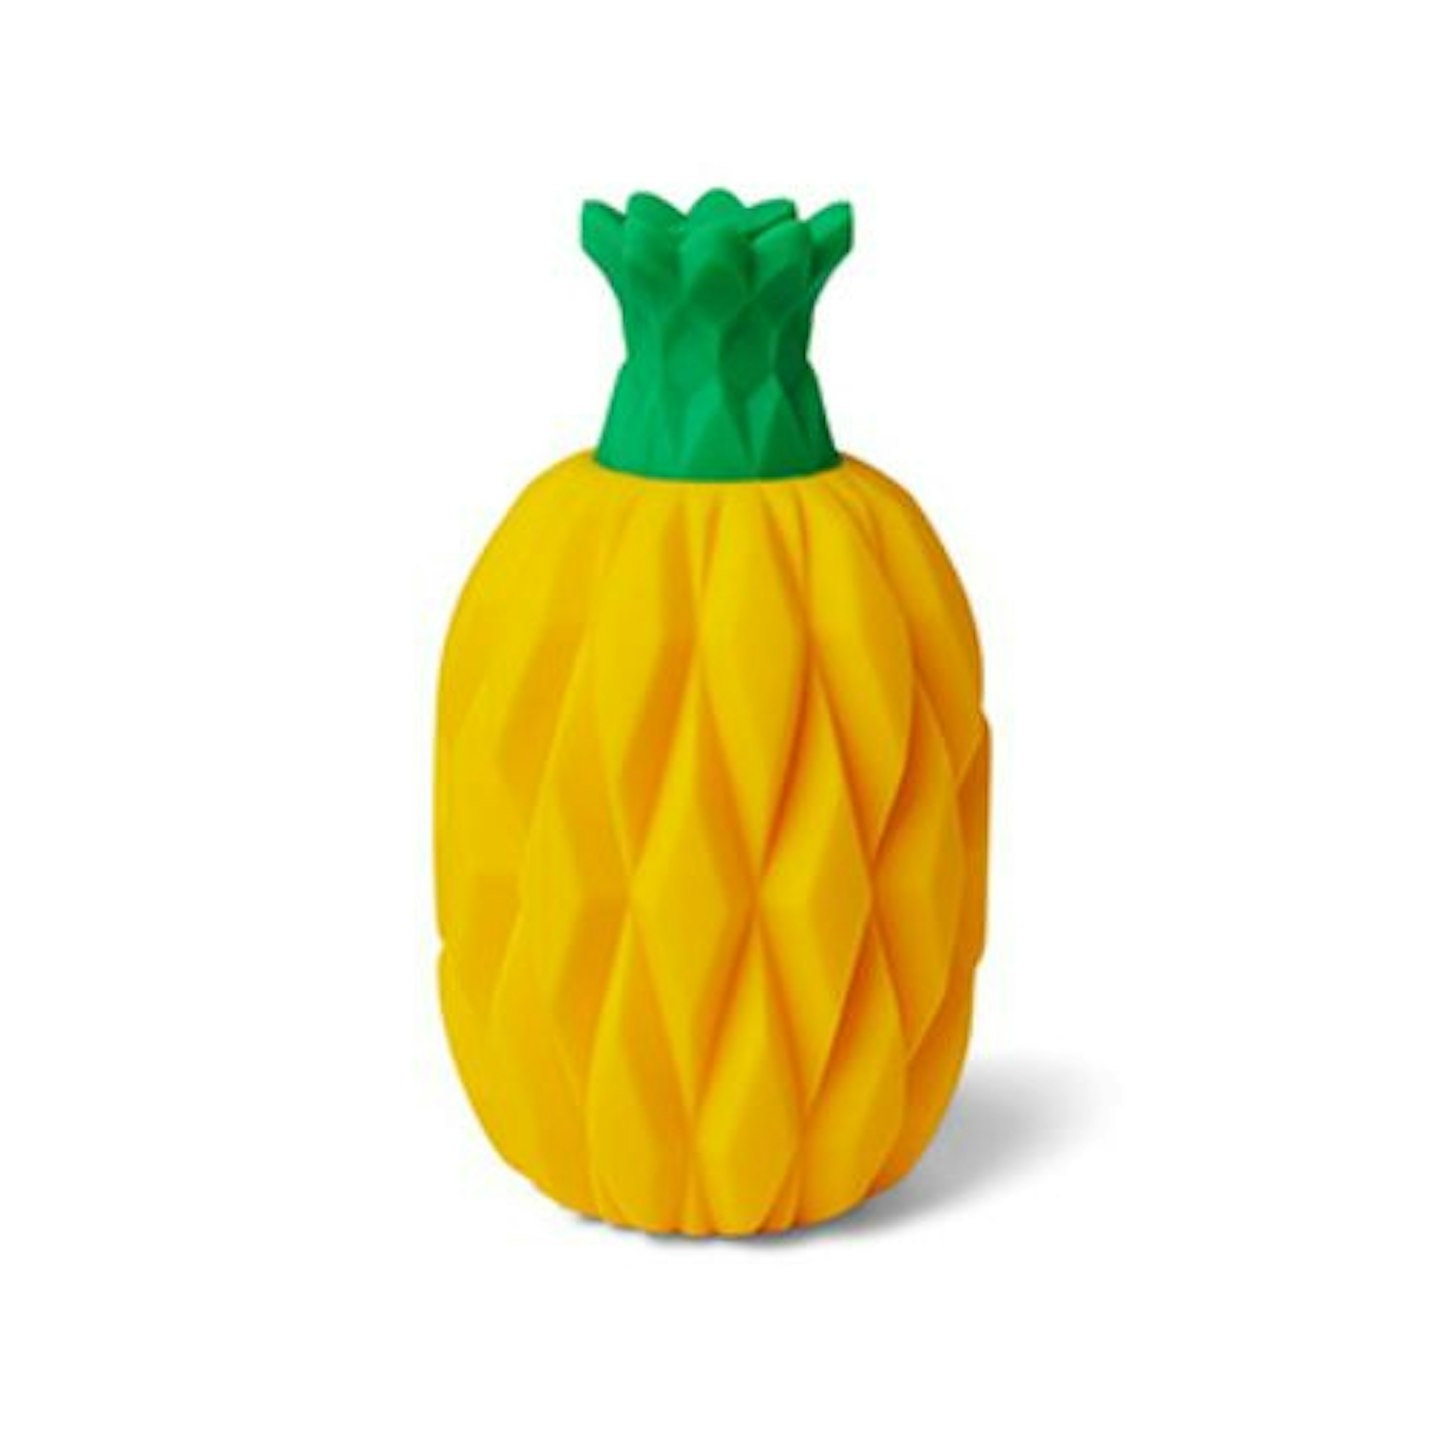 Pets at Home Ice Pineapple Cooler Dog Toy